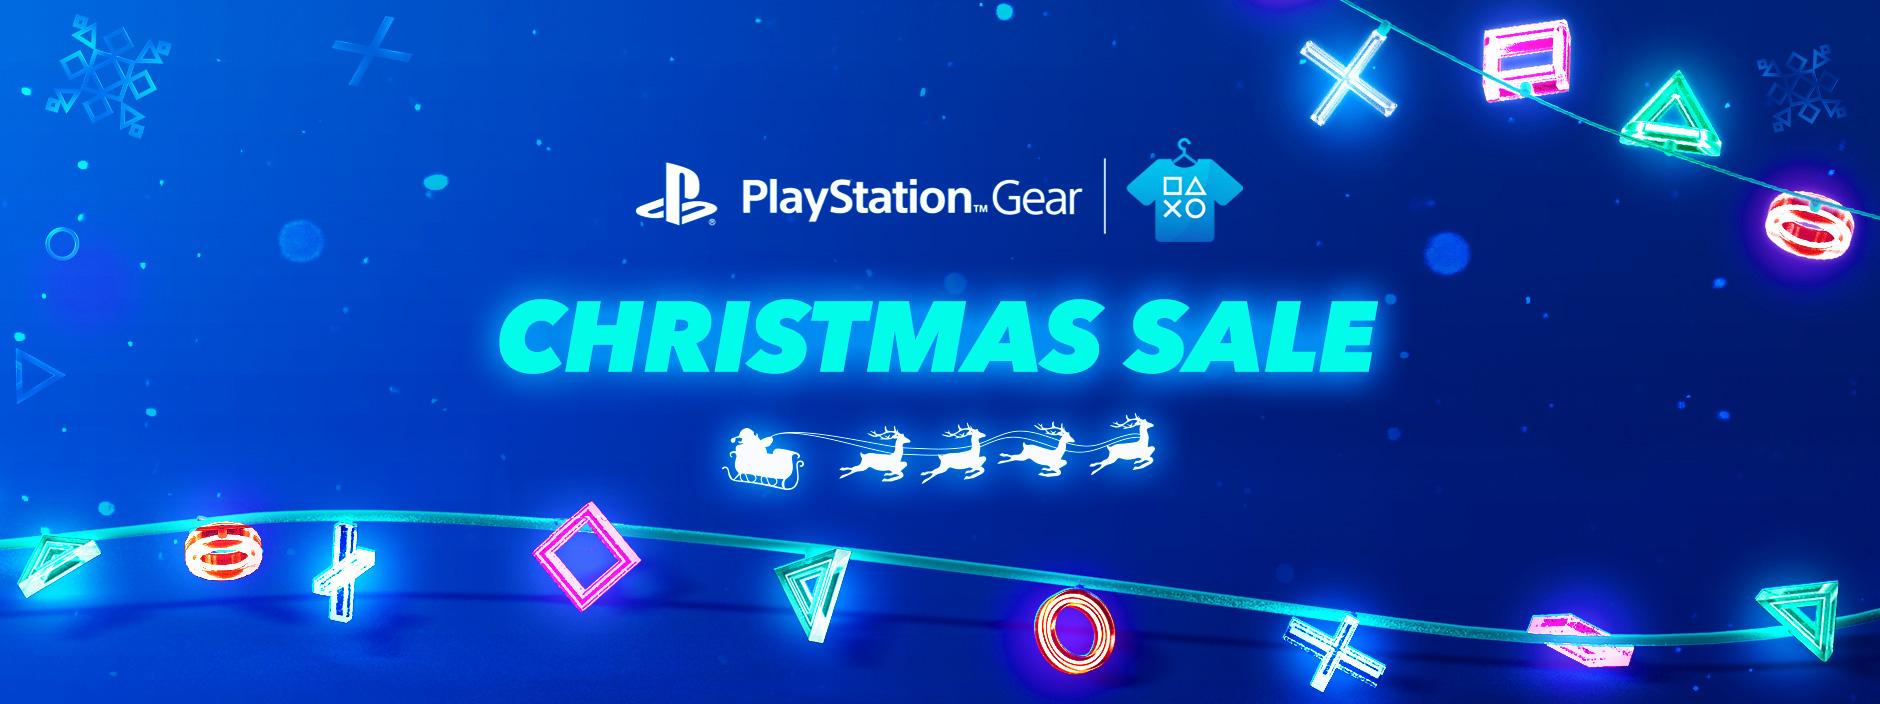 kantsten rulletrappe håndbevægelse PlayStation Europe on Twitter: "The PlayStation Gear Christmas Sale is now  live! Get discounts on #HorizonZeroDawn #WipEoutPS4 and #PlayStationFC gear  now, with more deals coming every day until 22nd December:  https://t.co/adM8hnu9uX https://t.co ...